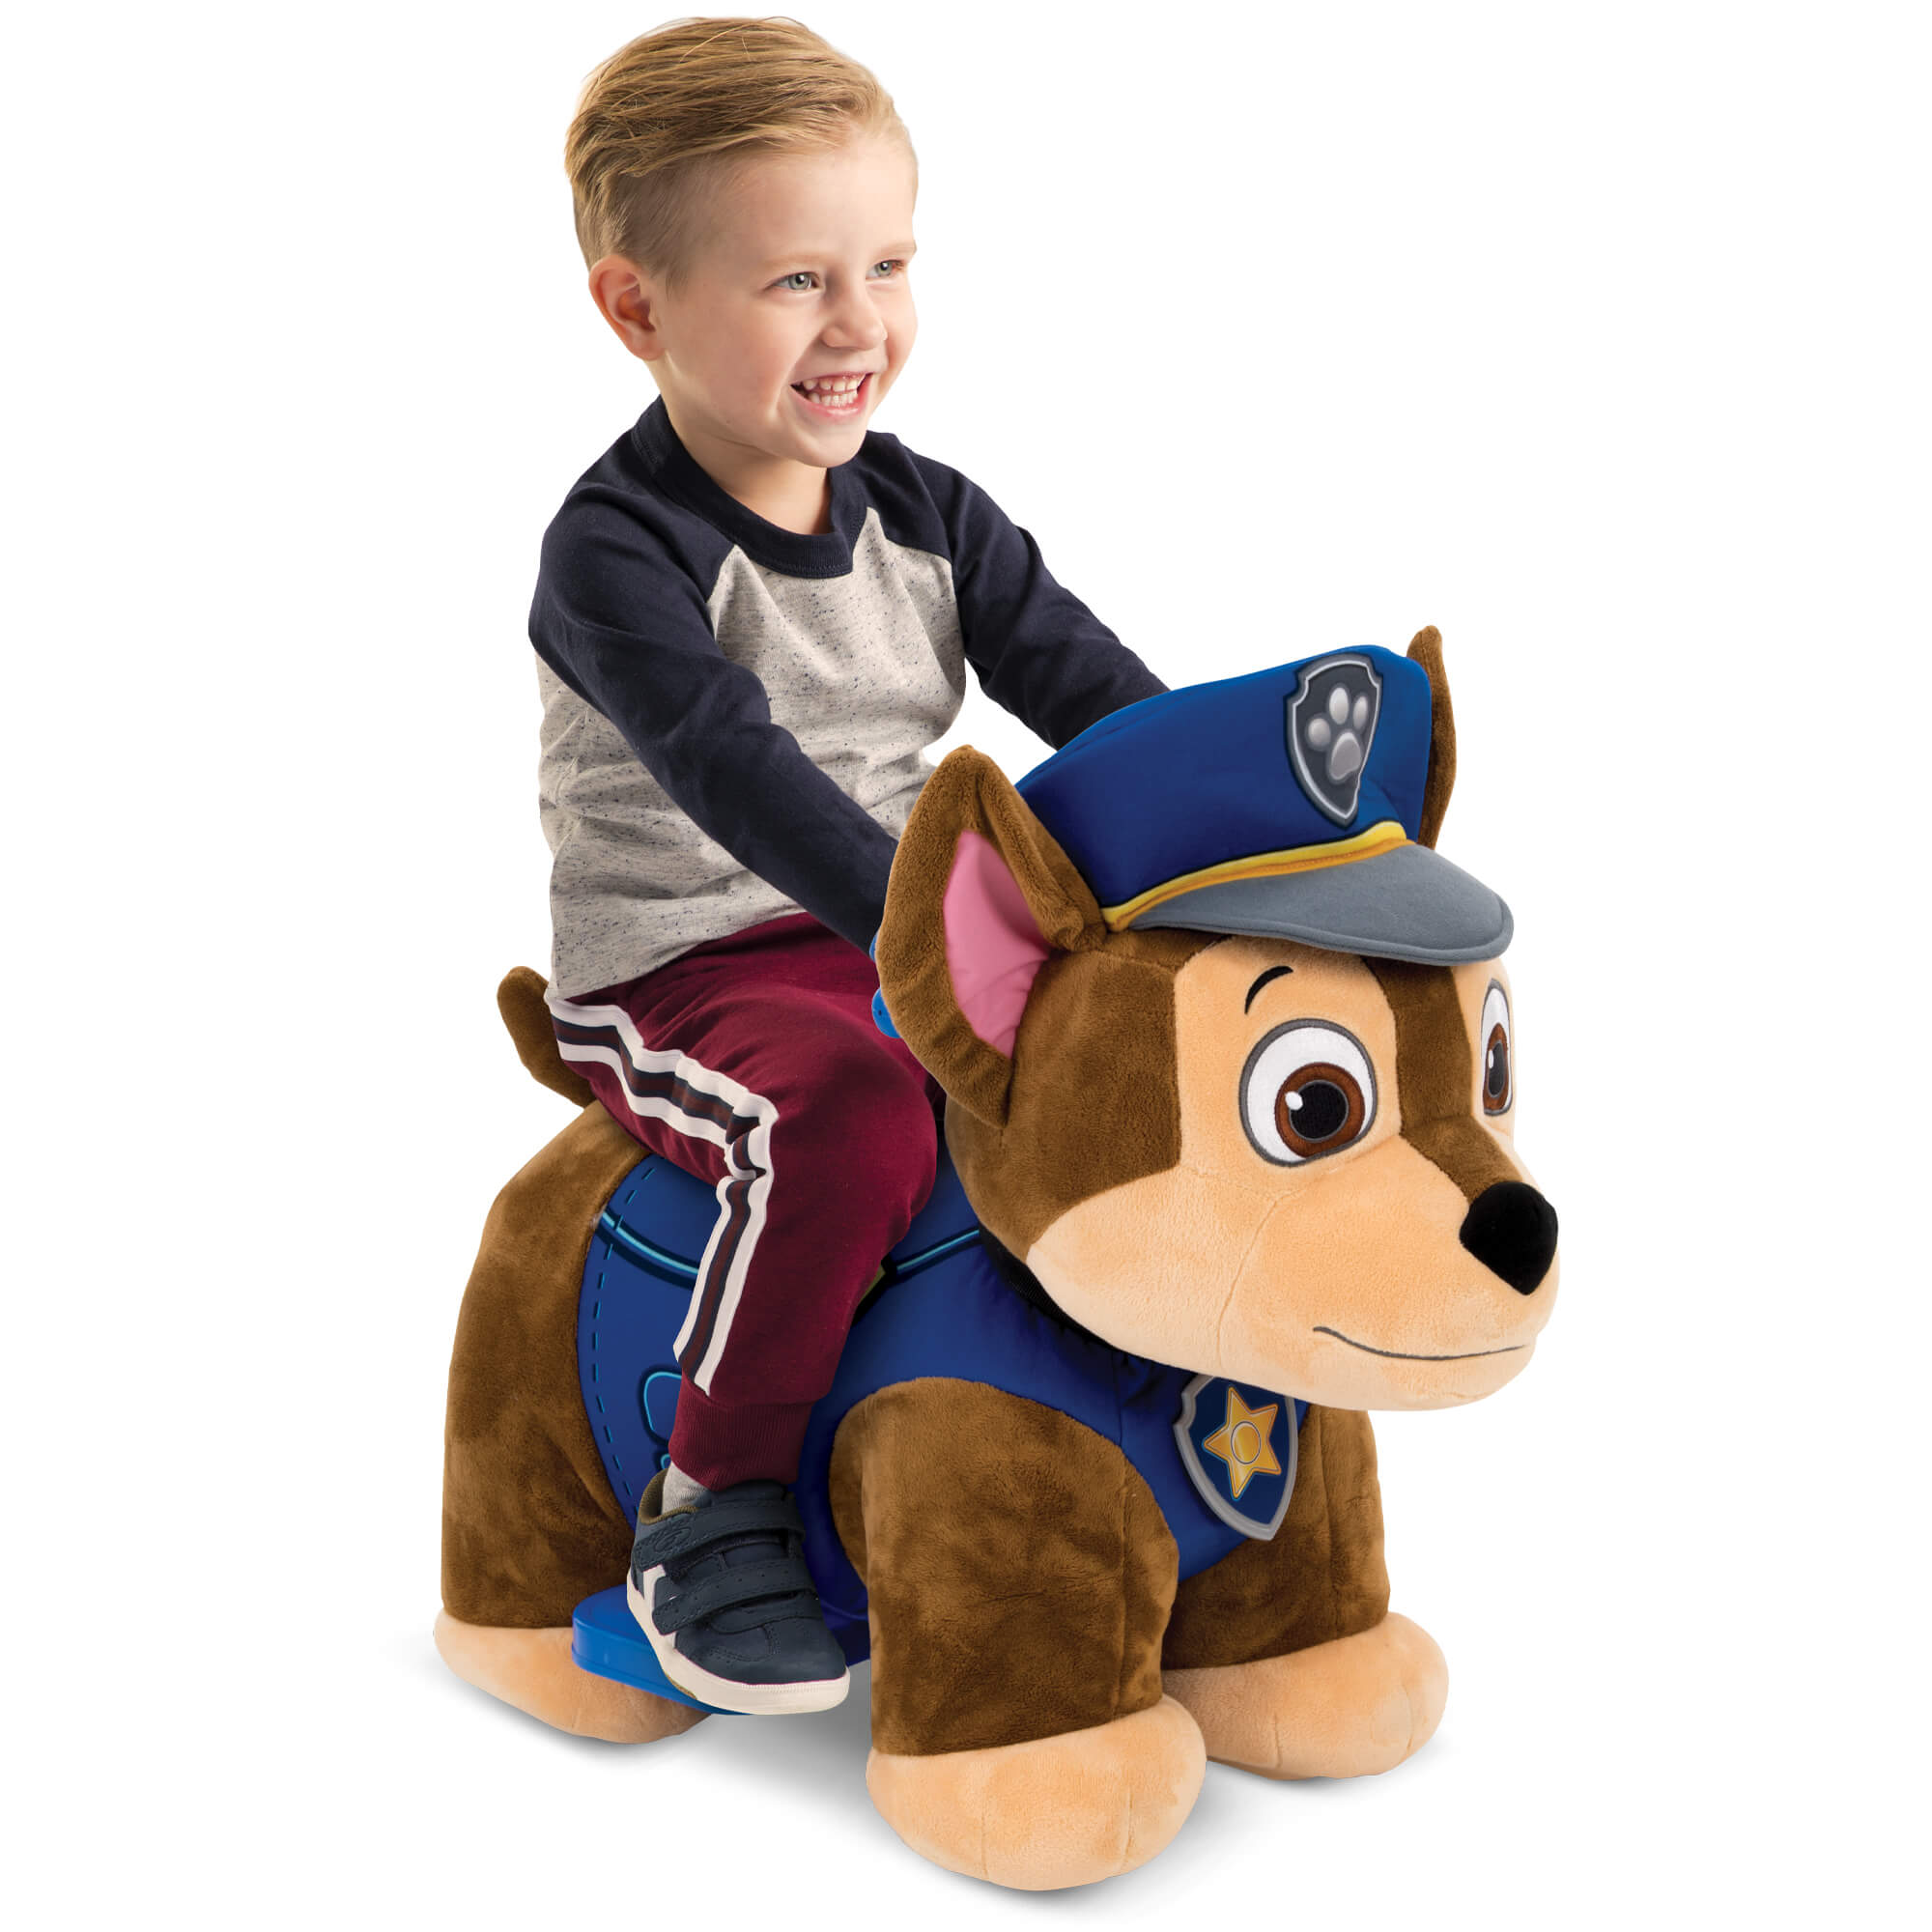 Nick Jr. PAW Patrol Chase 6V Plush Electric Ride-On Toy for Toddlers by Huffy - image 1 of 5